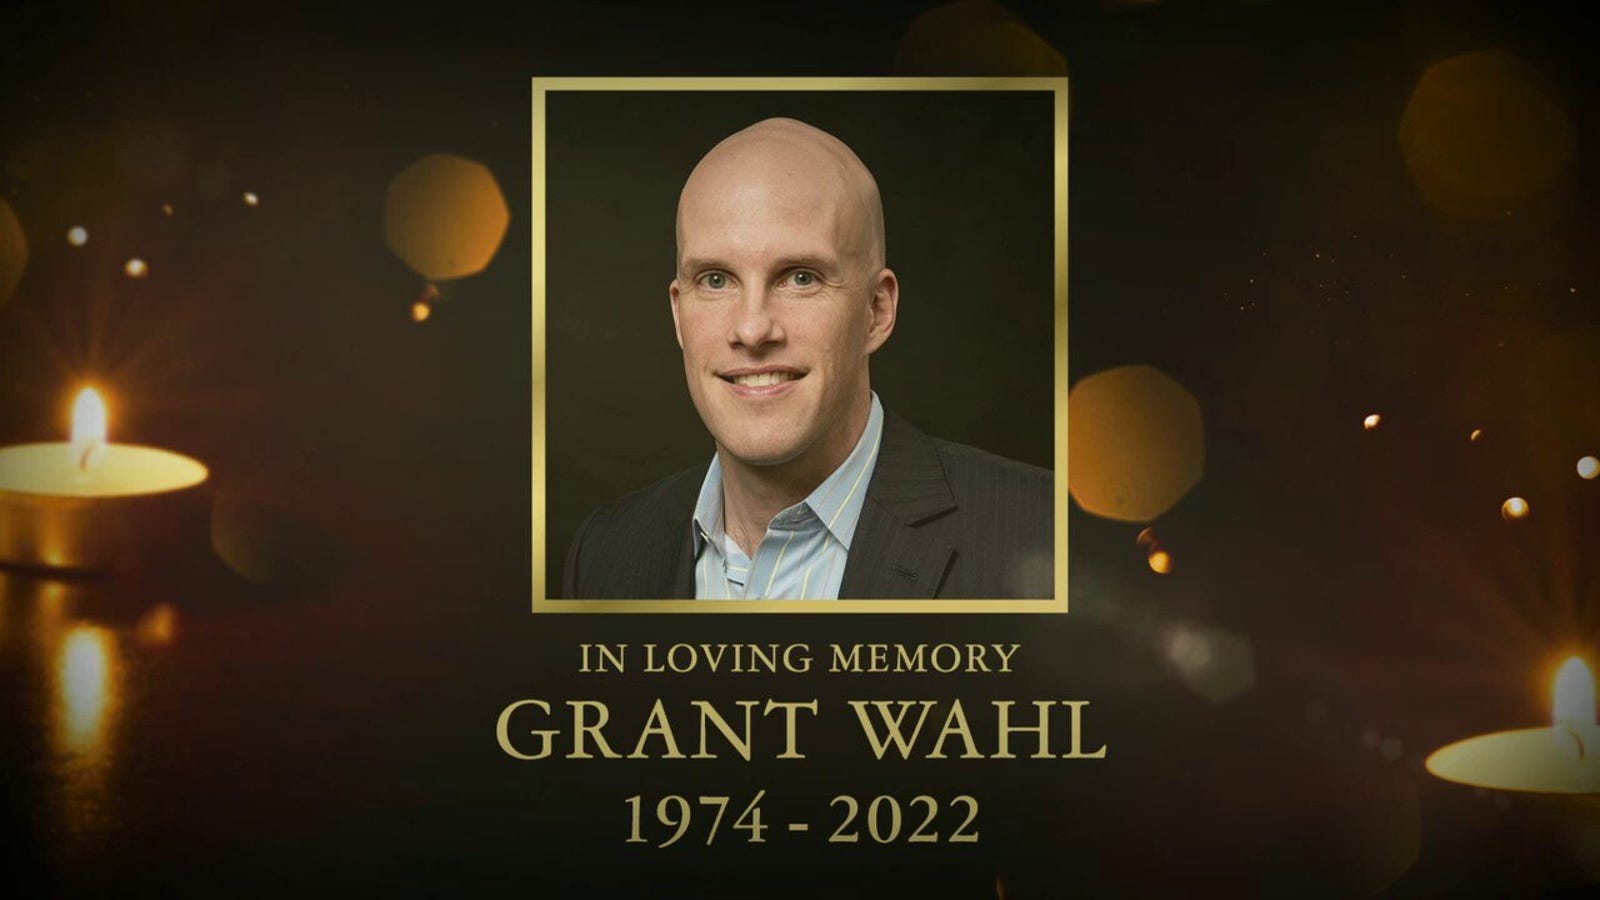 Grant Wahl was a dedicated colleague and friend to so many at FOX Sports